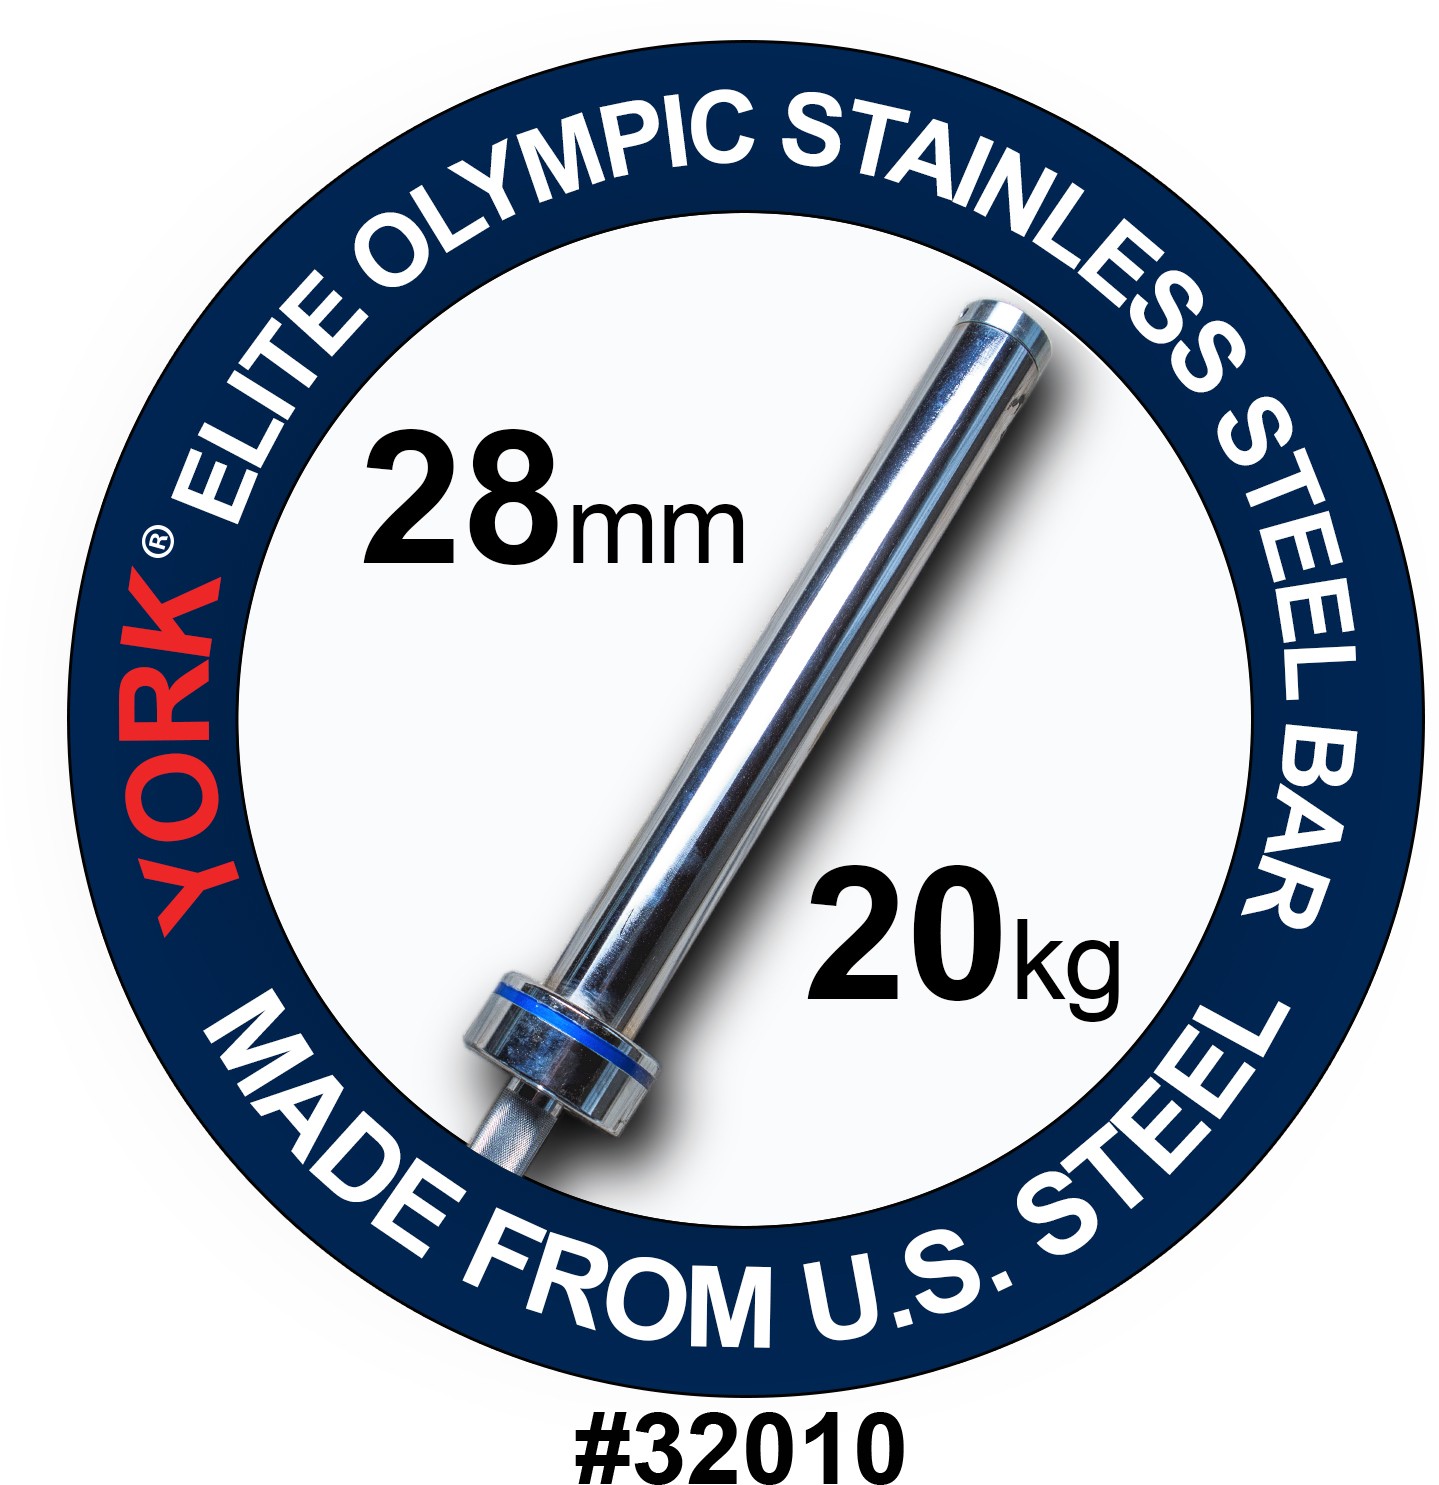 York Elite Olympic Stainless Steel Weight Bar | 28mm (New)